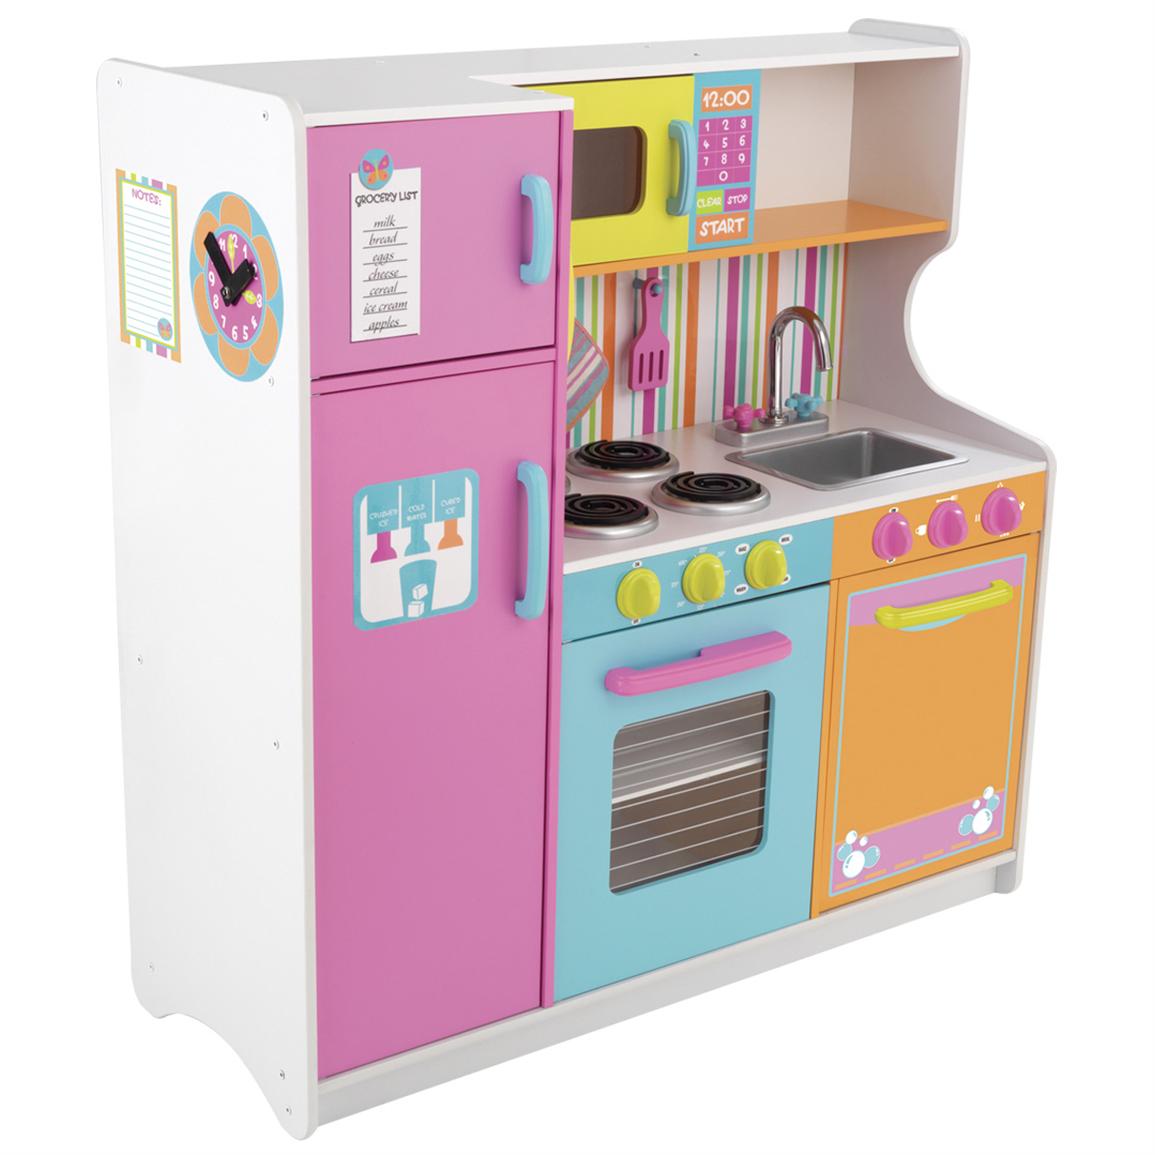 KidKraft Deluxe Big & Bright Kitchen - 146108, Toys at Sportsman's Guide